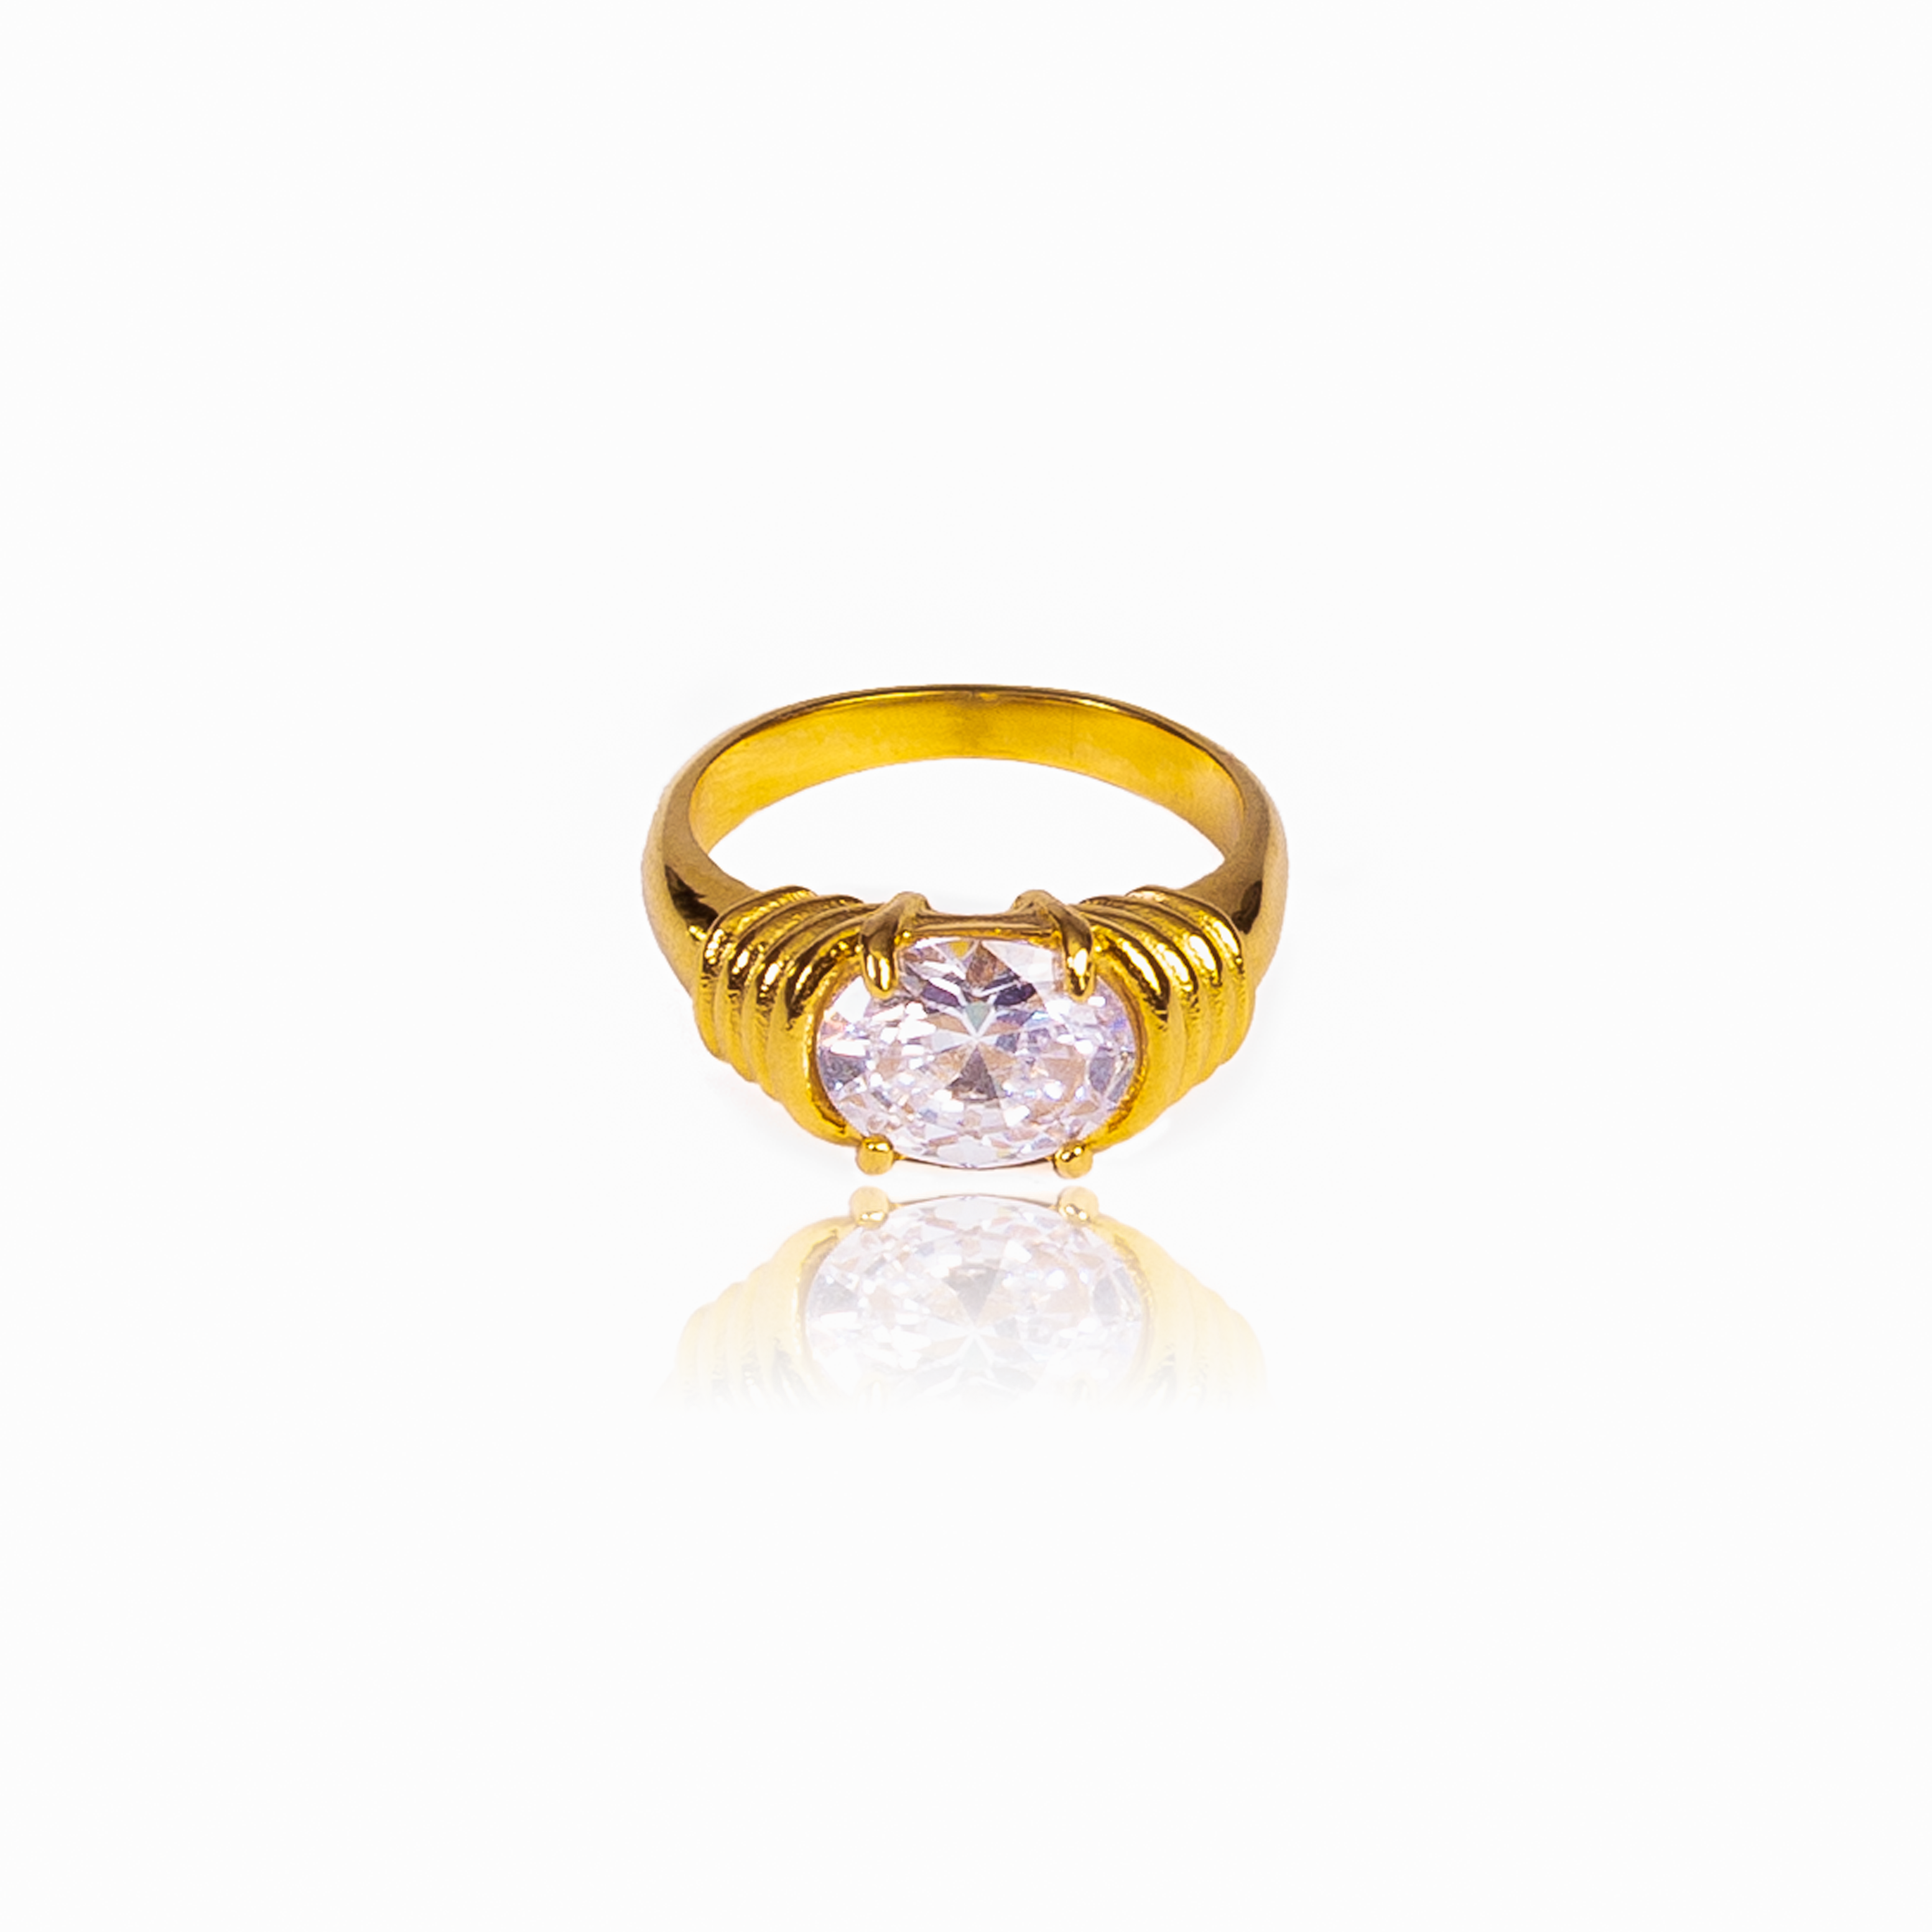 This gorgeous, Ease Ring is not just an ordinary ring. It features amazing stone finishes. The finish of the ring is very shiny and beautiful with beautiful colors inside, all in one ring.   Available in four colors. 18K gold plated on stainless steel. Available in size 6, 7, 8